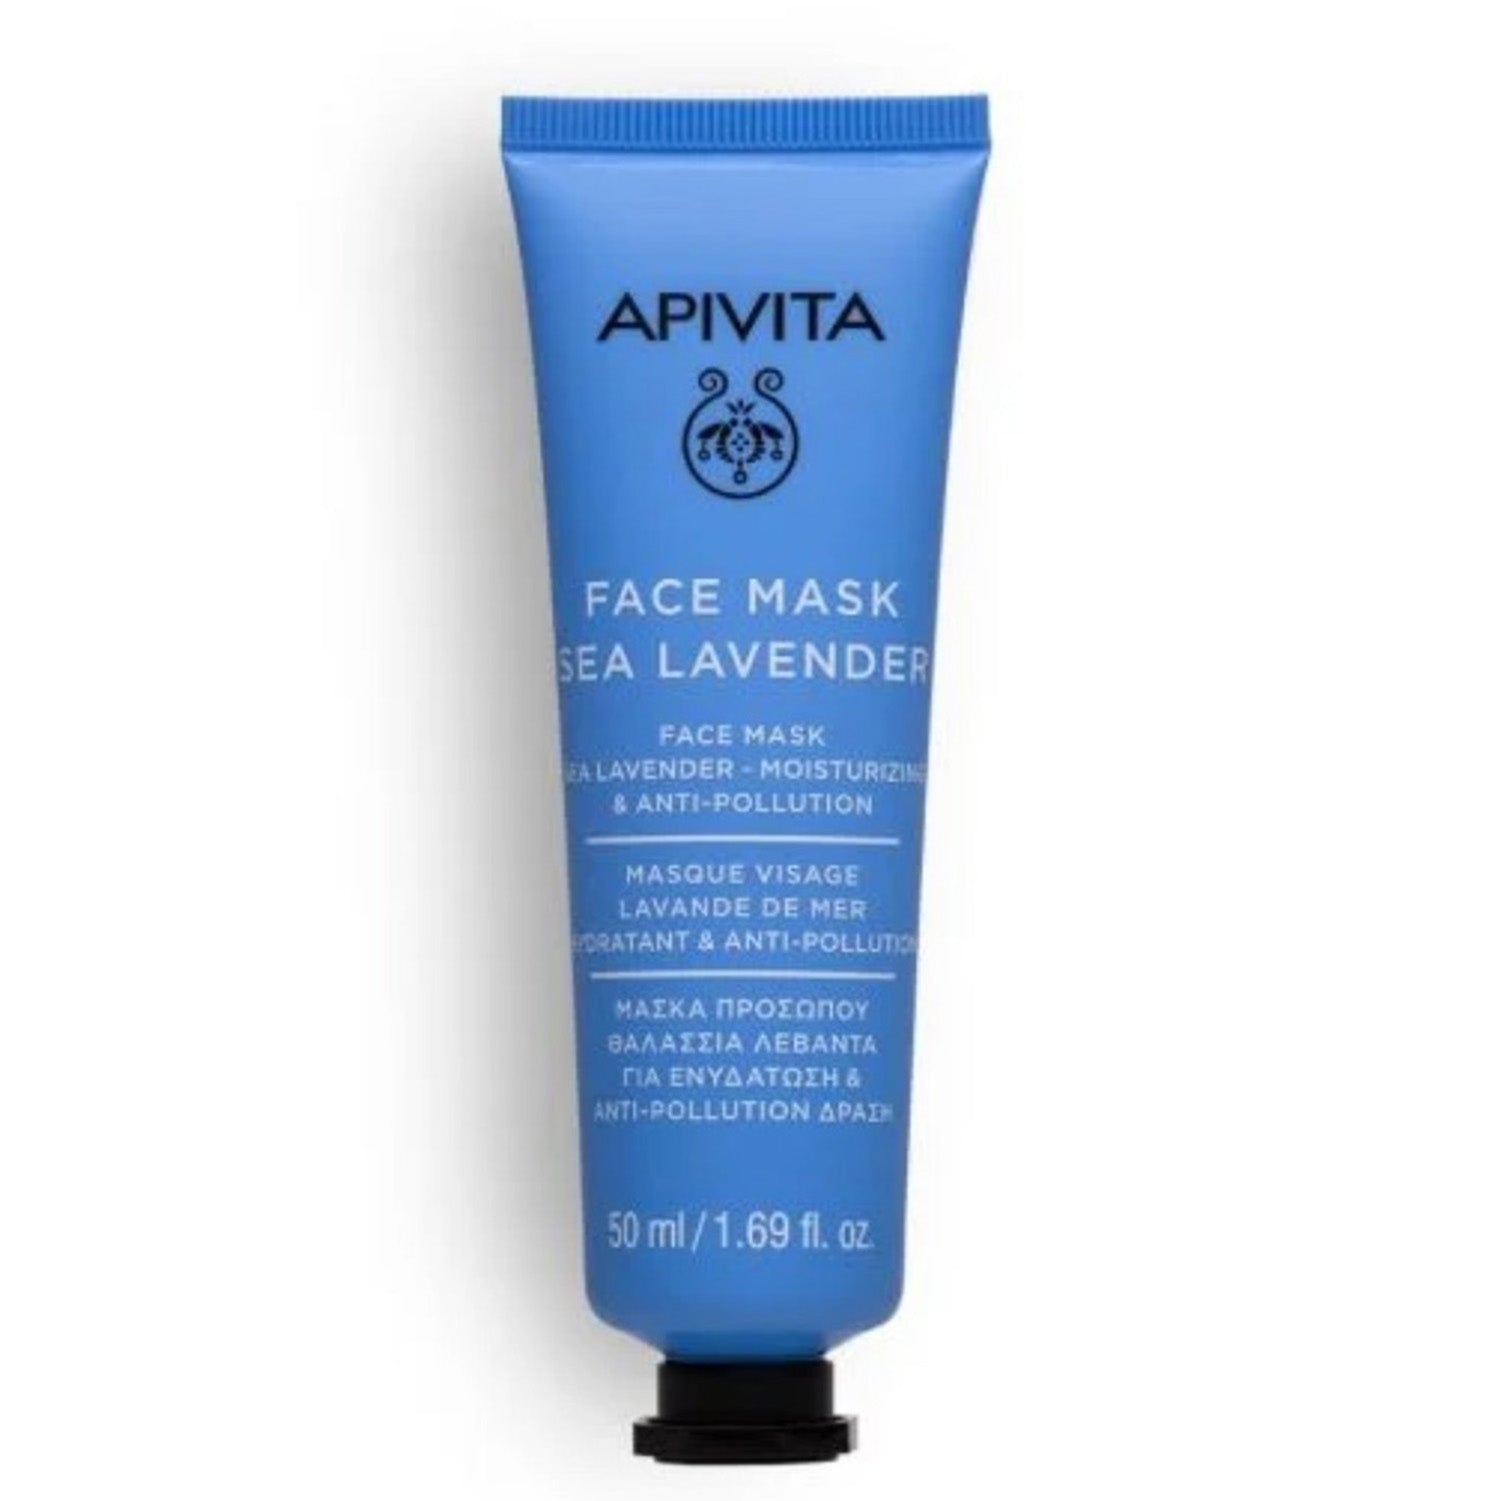 Apivita Face Mask with Sea Levander is formulated with 97% natural ingredients and is suitable for all skin types. It offers cooling, moisturising properties along with sea lavender extract to rejuvenate the skin.